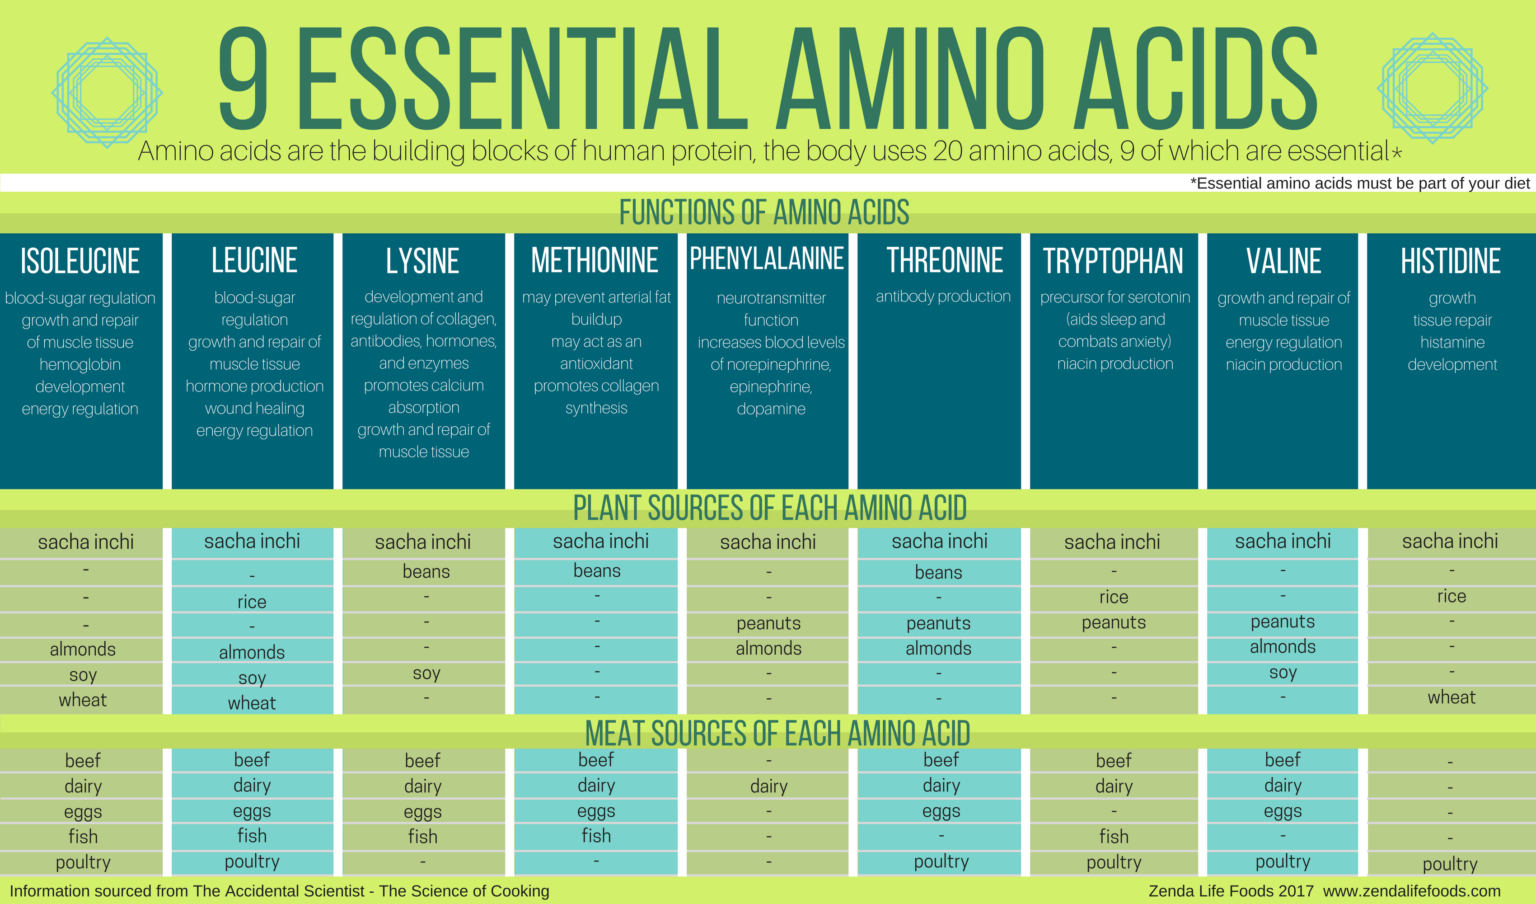 Does this mean vegans and vegetarians are not getting the amino acids they ...